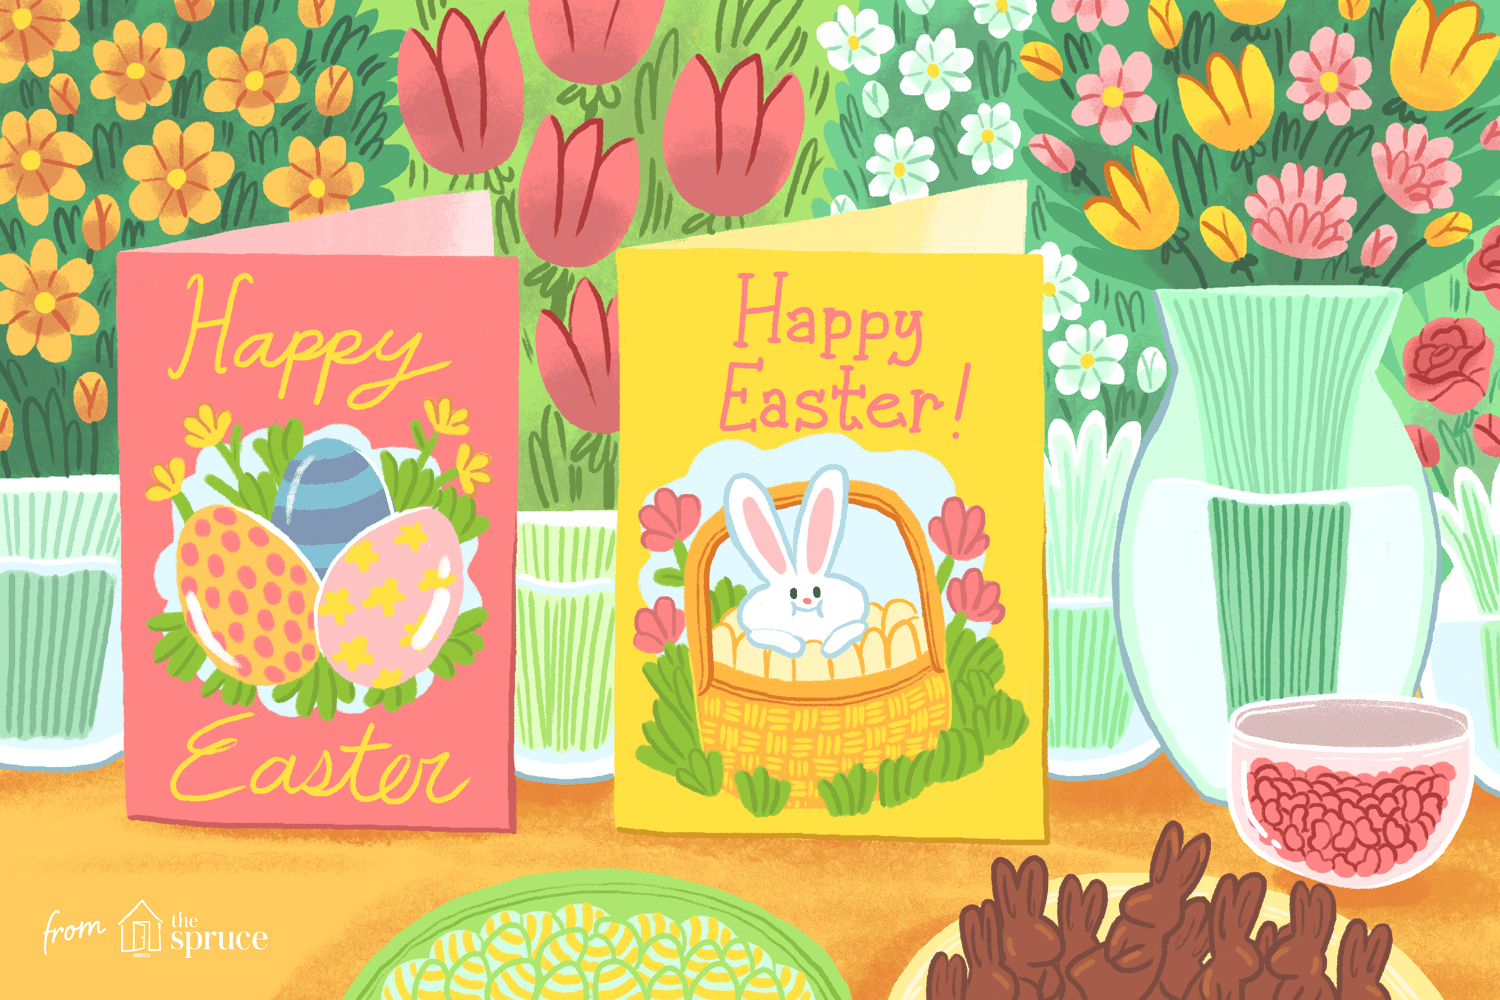 12 Free, Printable Easter Cards For Everyone You Know - Free Printable Easter Cards